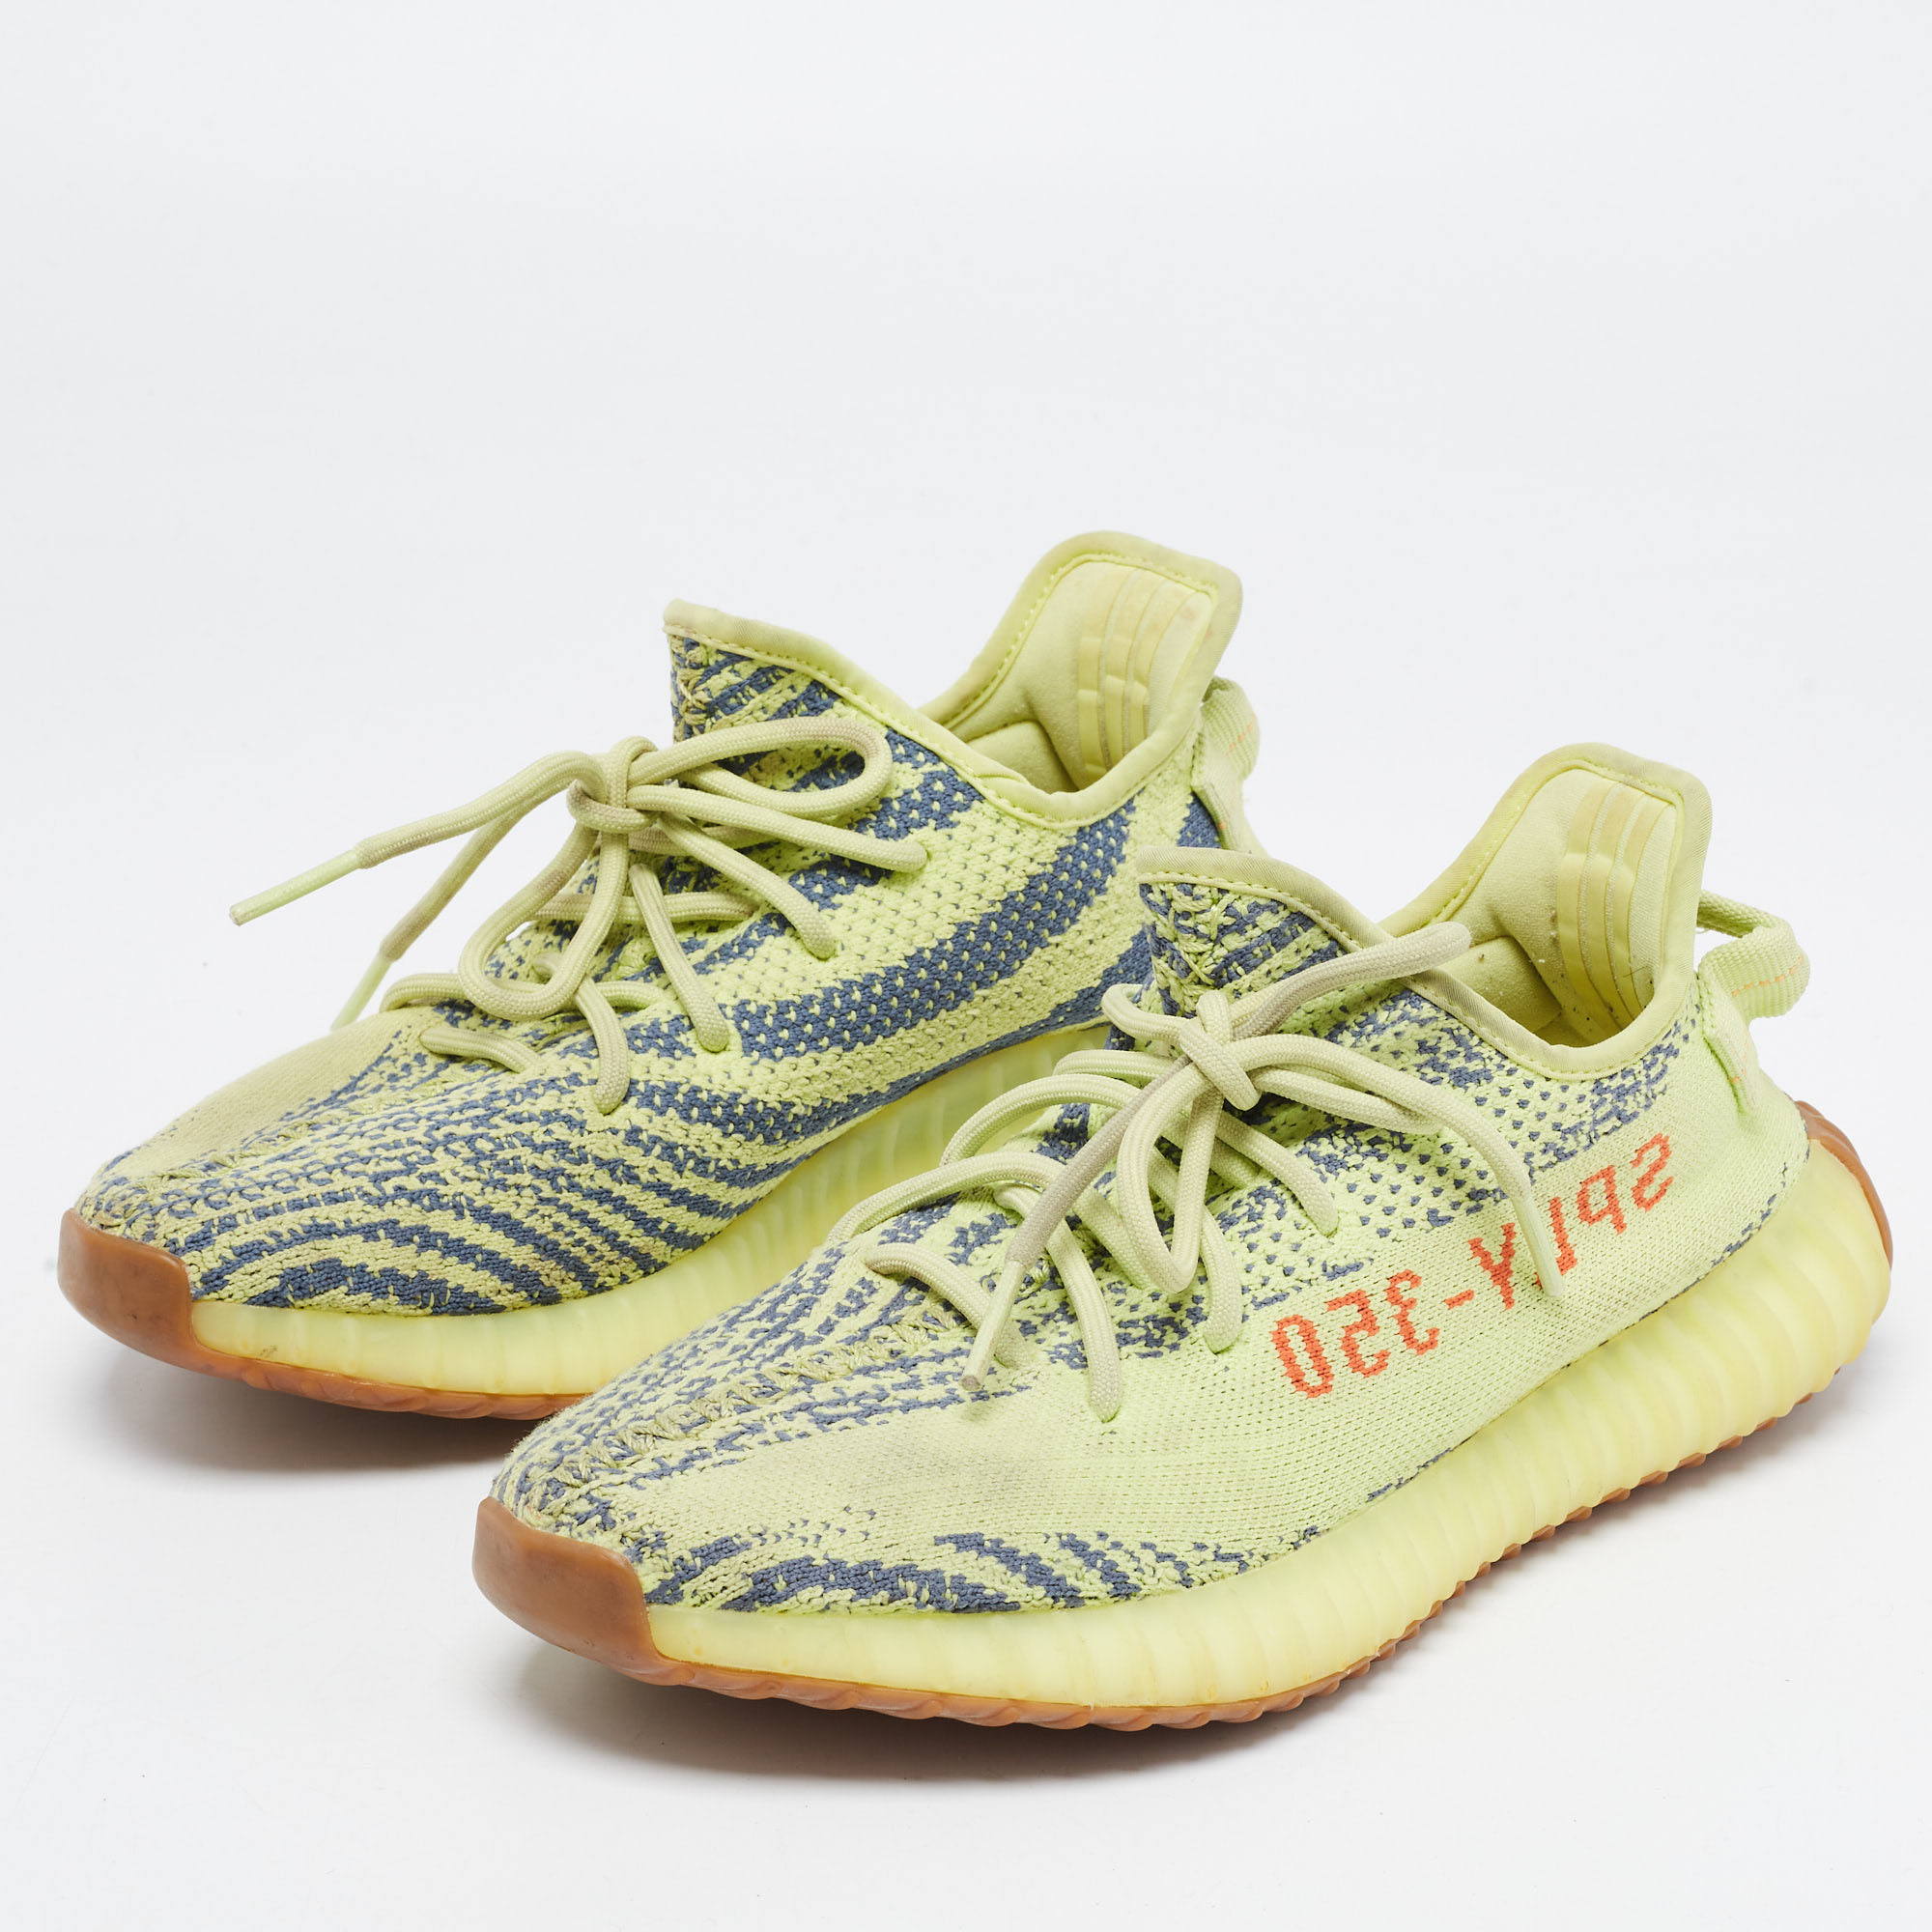 

Yeezy x Adidas Neon Knit Fabric Boost 350 V2 Semi Frozen Yellow Sneakers Size 40 2/3, Green